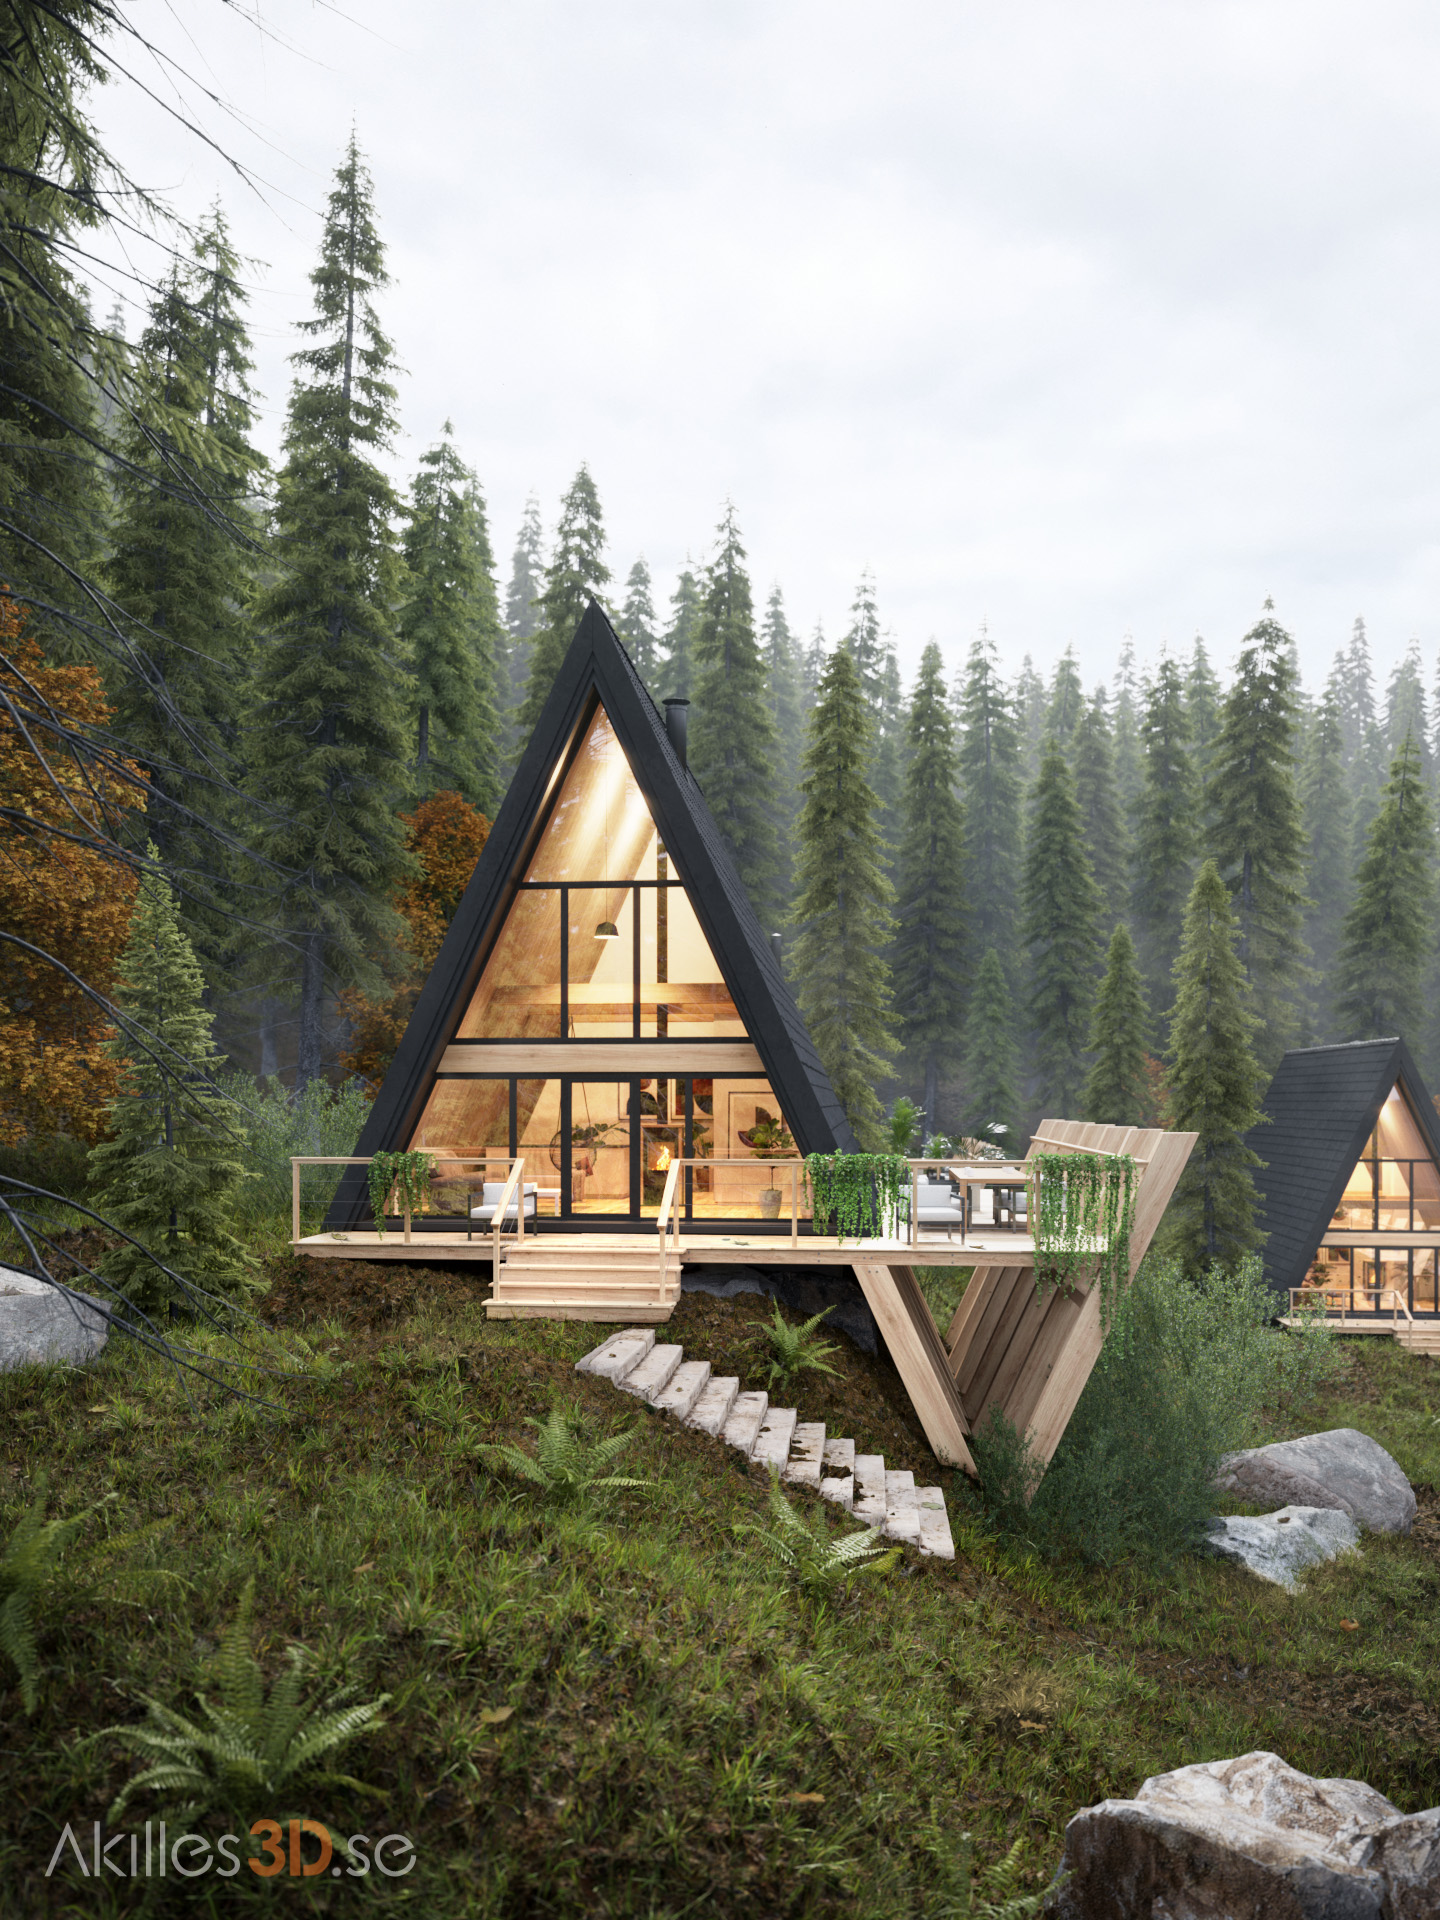 Cabins in the forest 2 - fog pines realistic 3D visualization exterior architecture CGI high-end top quality